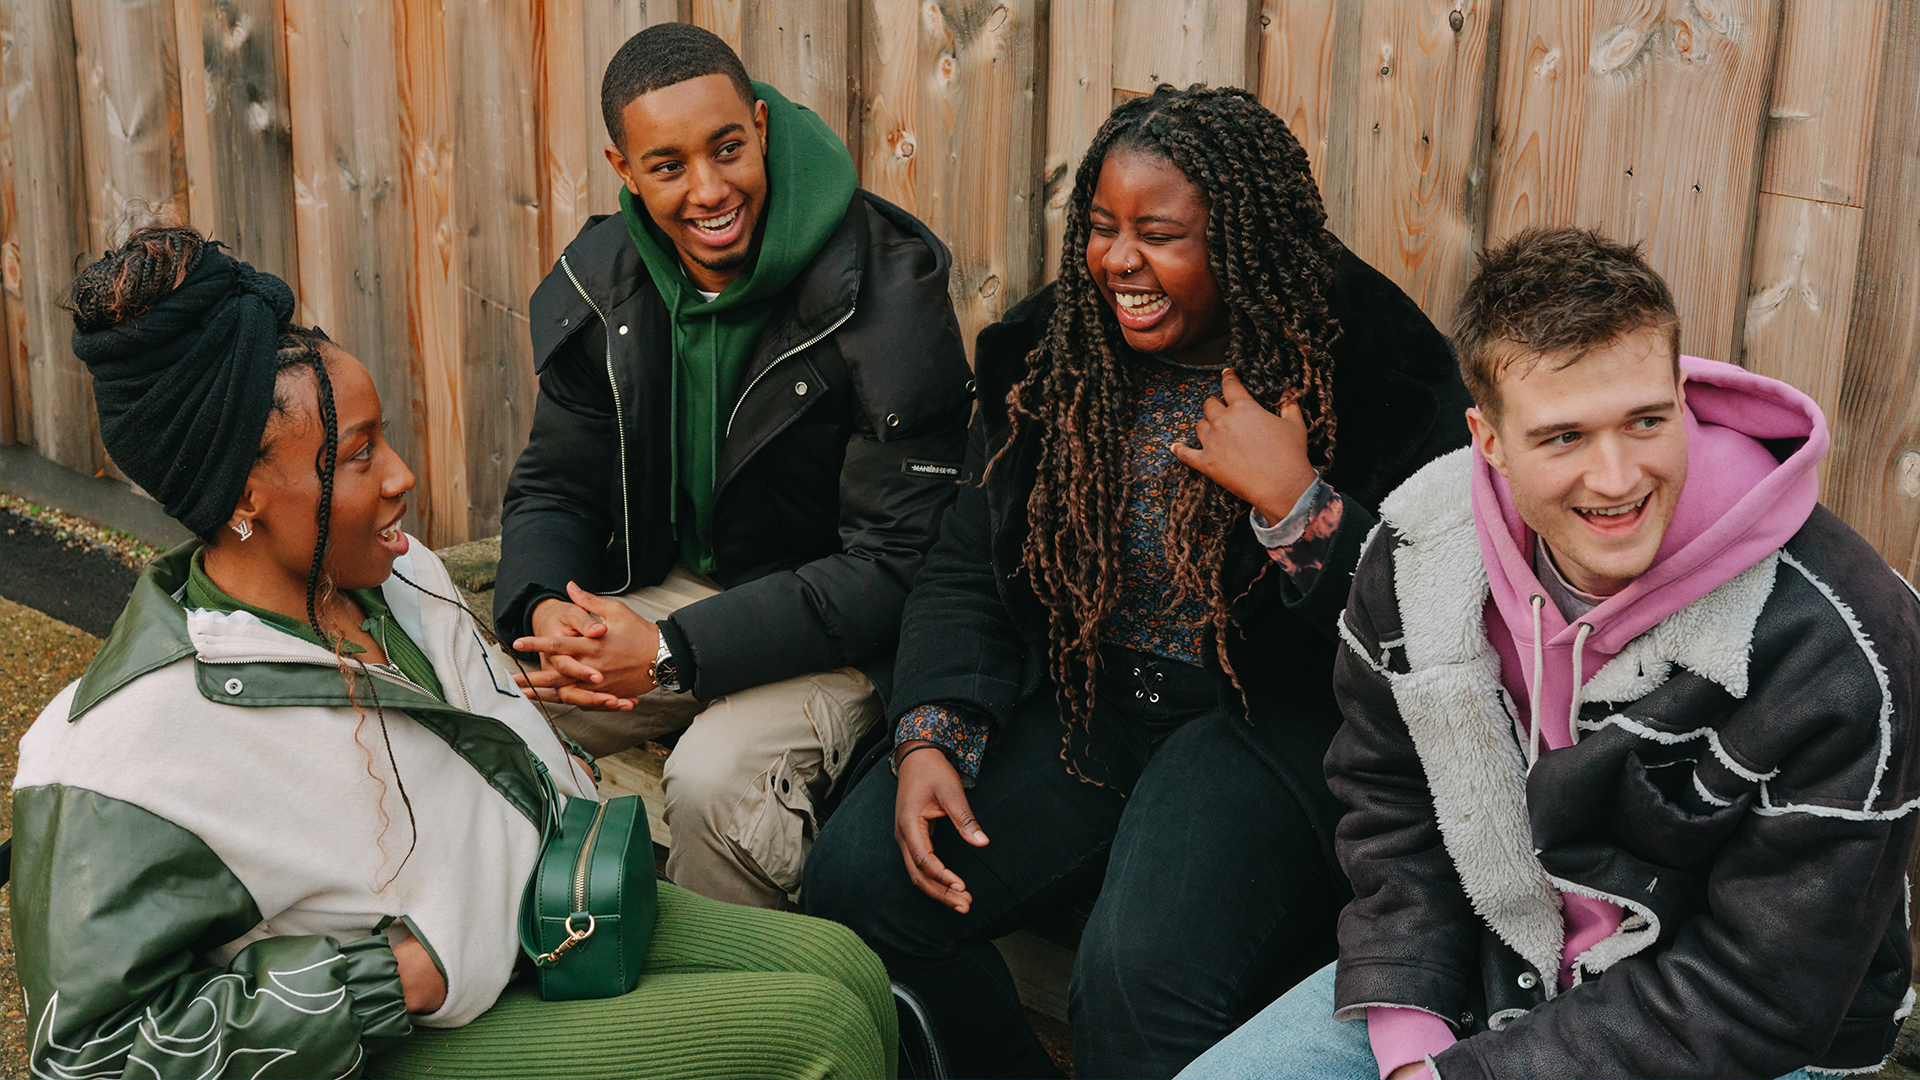 A group of young people sitting together outside chatting and laughing.